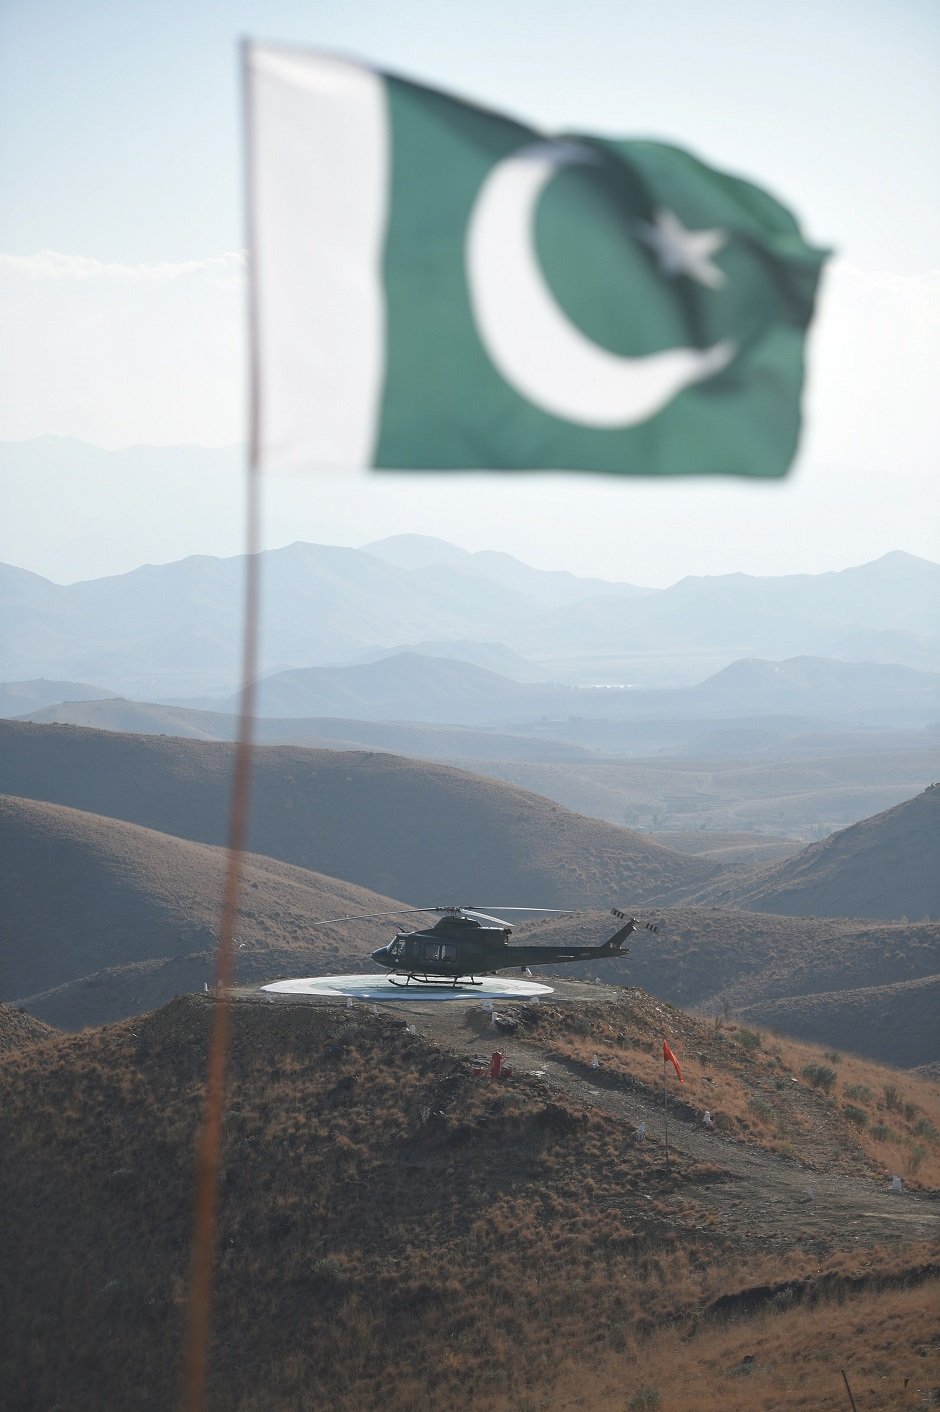 A Pakistani army helicopter is seen at an heliport at a border terminal in Ghulam Khan, a town in North Waziristan. PHOTO: AFP